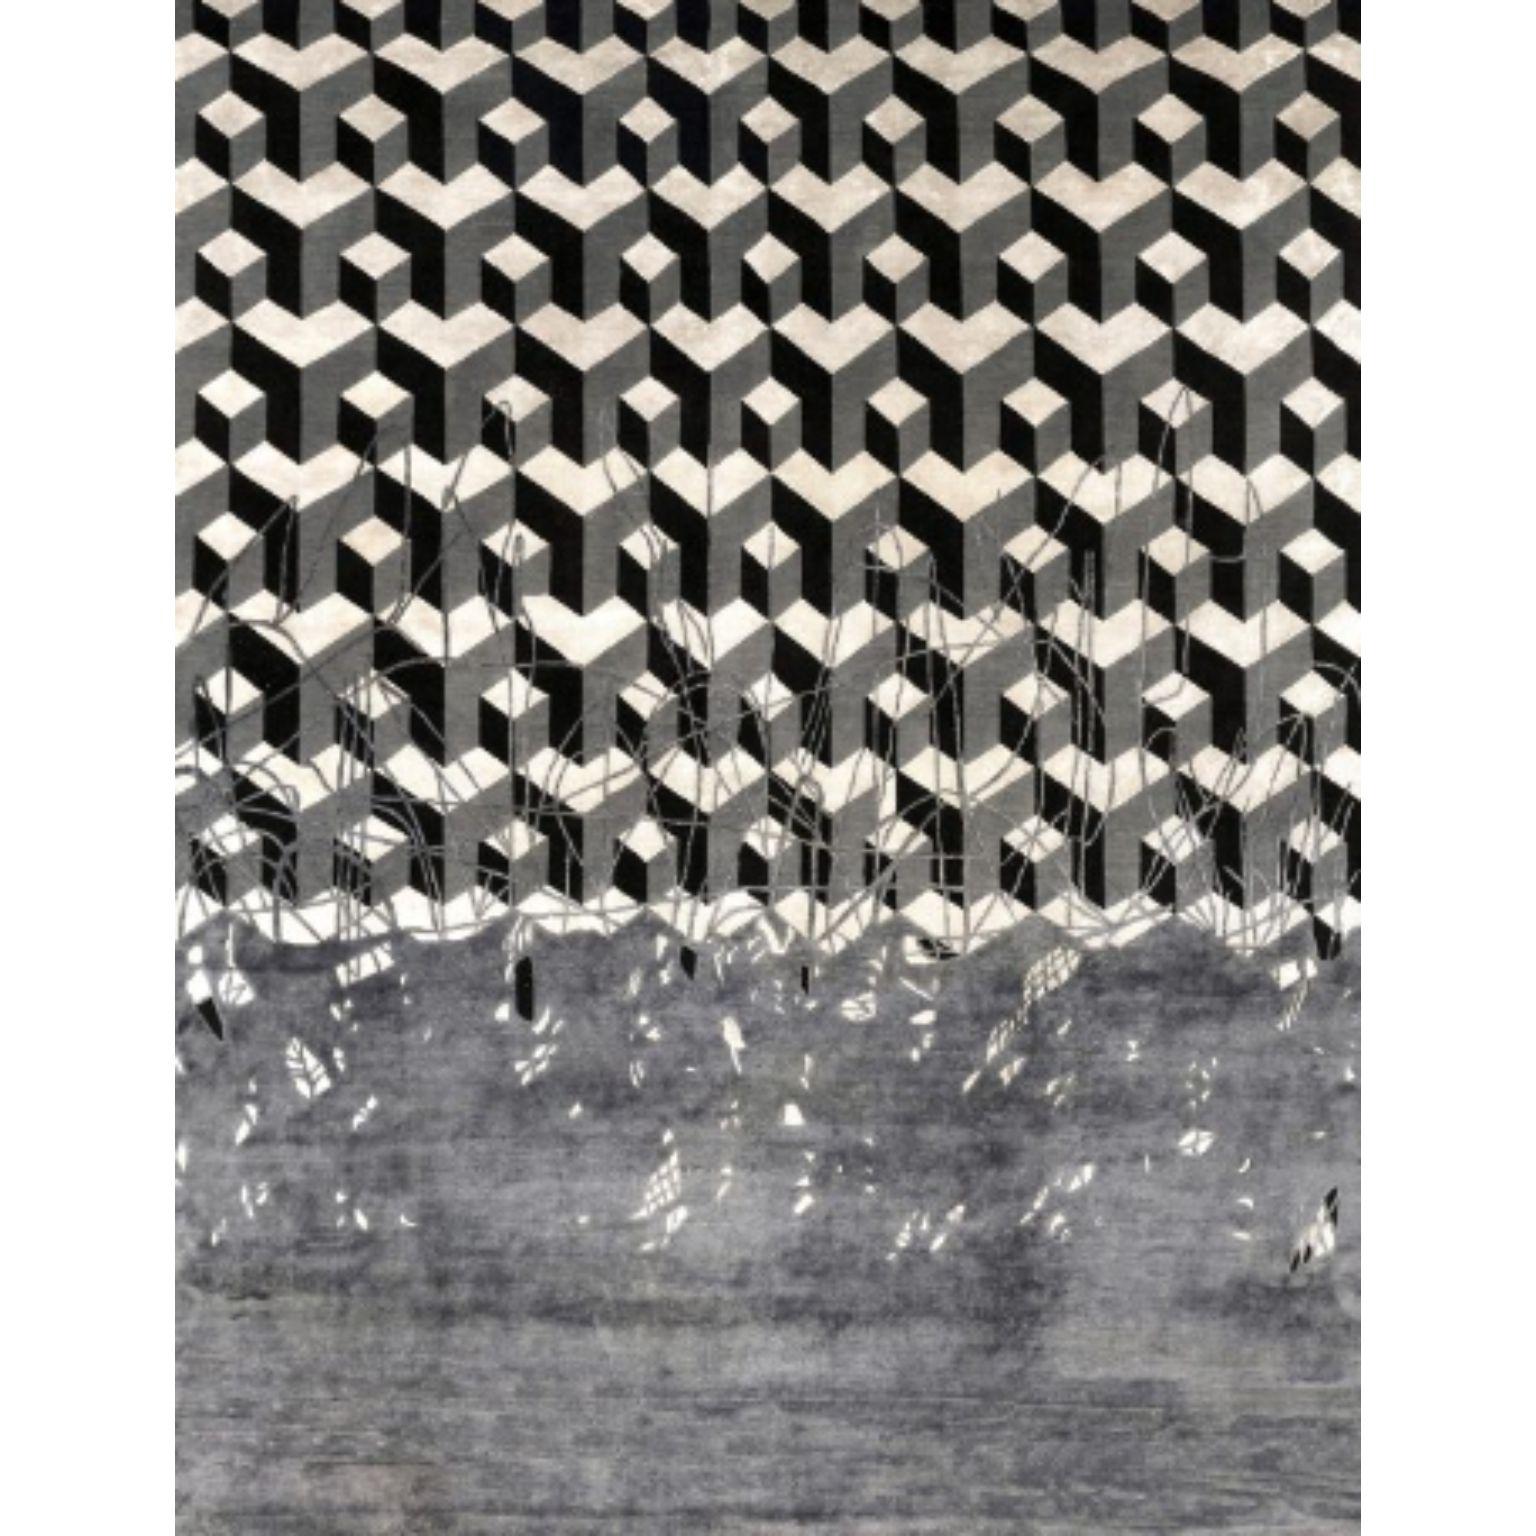 HEISENBERG 200 Rug by Illulian
Dimensions: D300 x H200 cm 
Materials: Wool 50%, Silk 50%
Variations available and prices may vary according to materials and sizes. 

Illulian, historic and prestigious rug company brand, internationally renowned